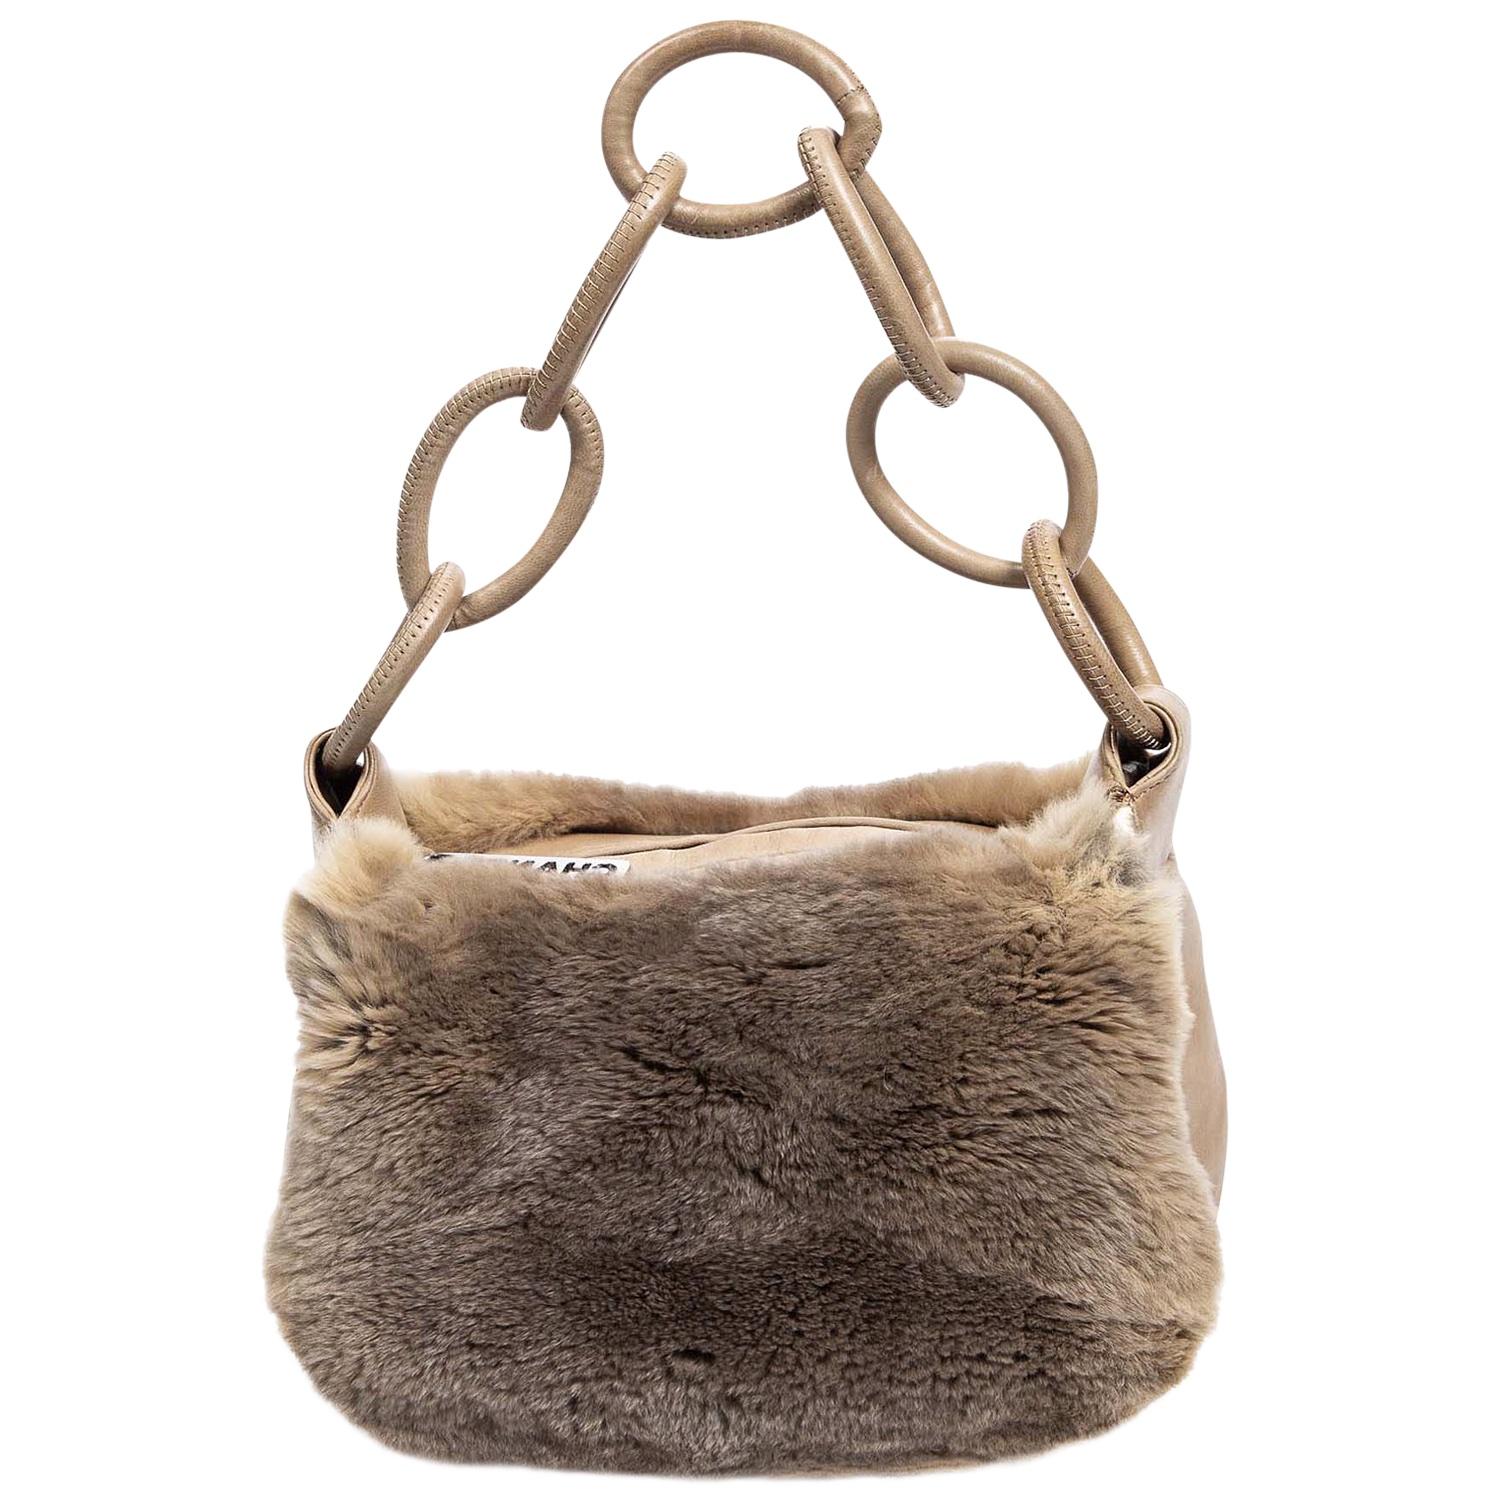 BRRRR it's cold in here! From the Fall 2004 Collection by Karl Lagerfeld, this vintage beauty is crafted in brown fur with tonal leather paneling with an interlocking CC logo & chain-link accent. With silver-tone hardware and a single shoulder strap